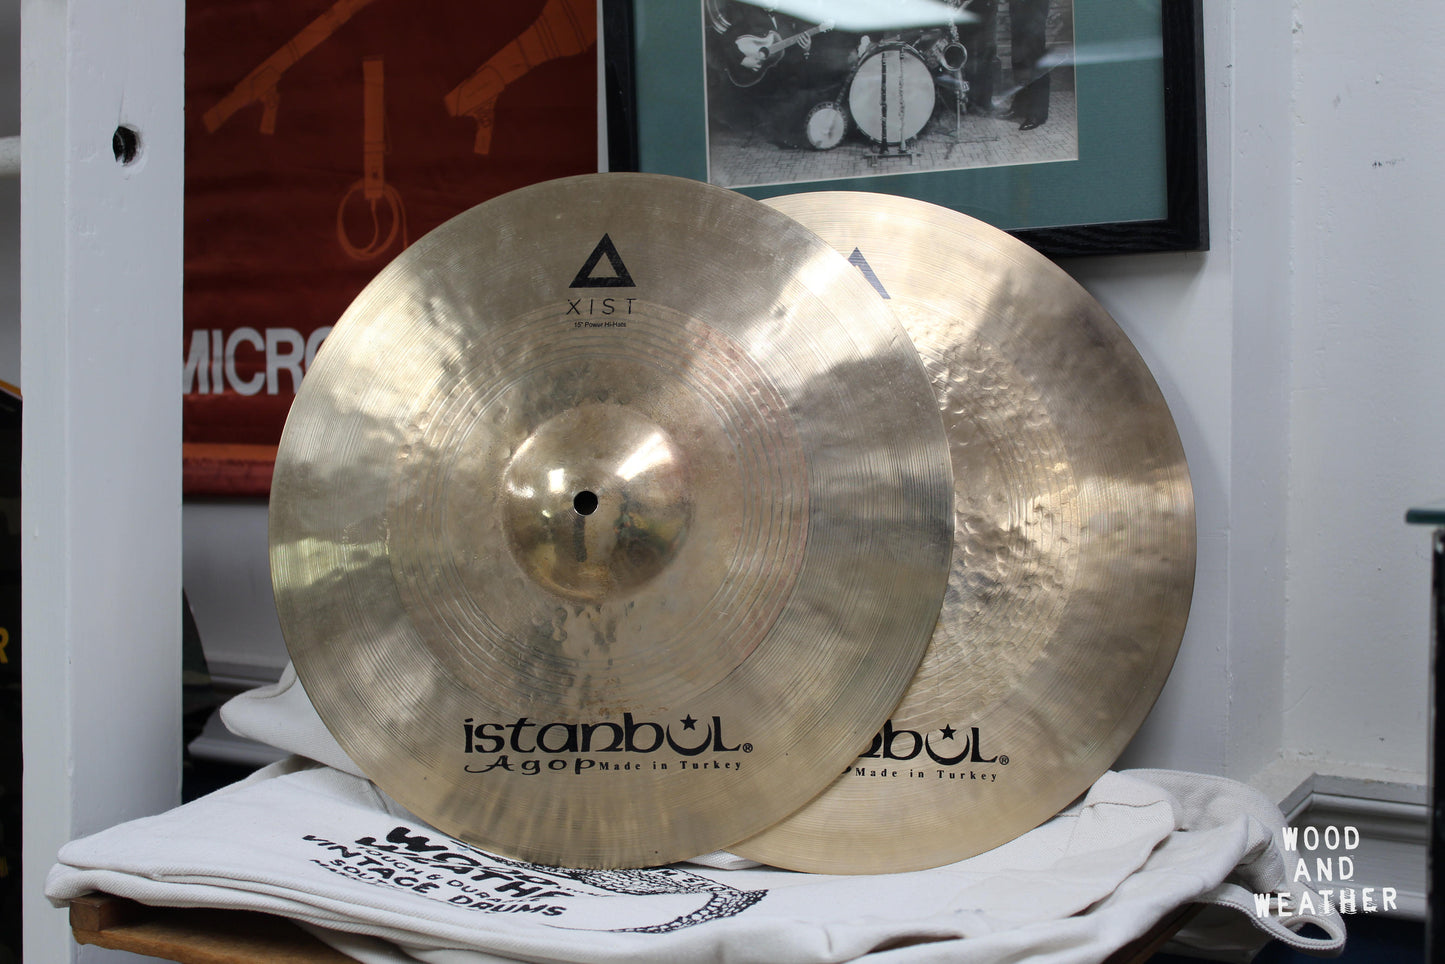 Used Istanbul Agop 15" Xist Power Hi-Hat Cymbals 1220/1530g